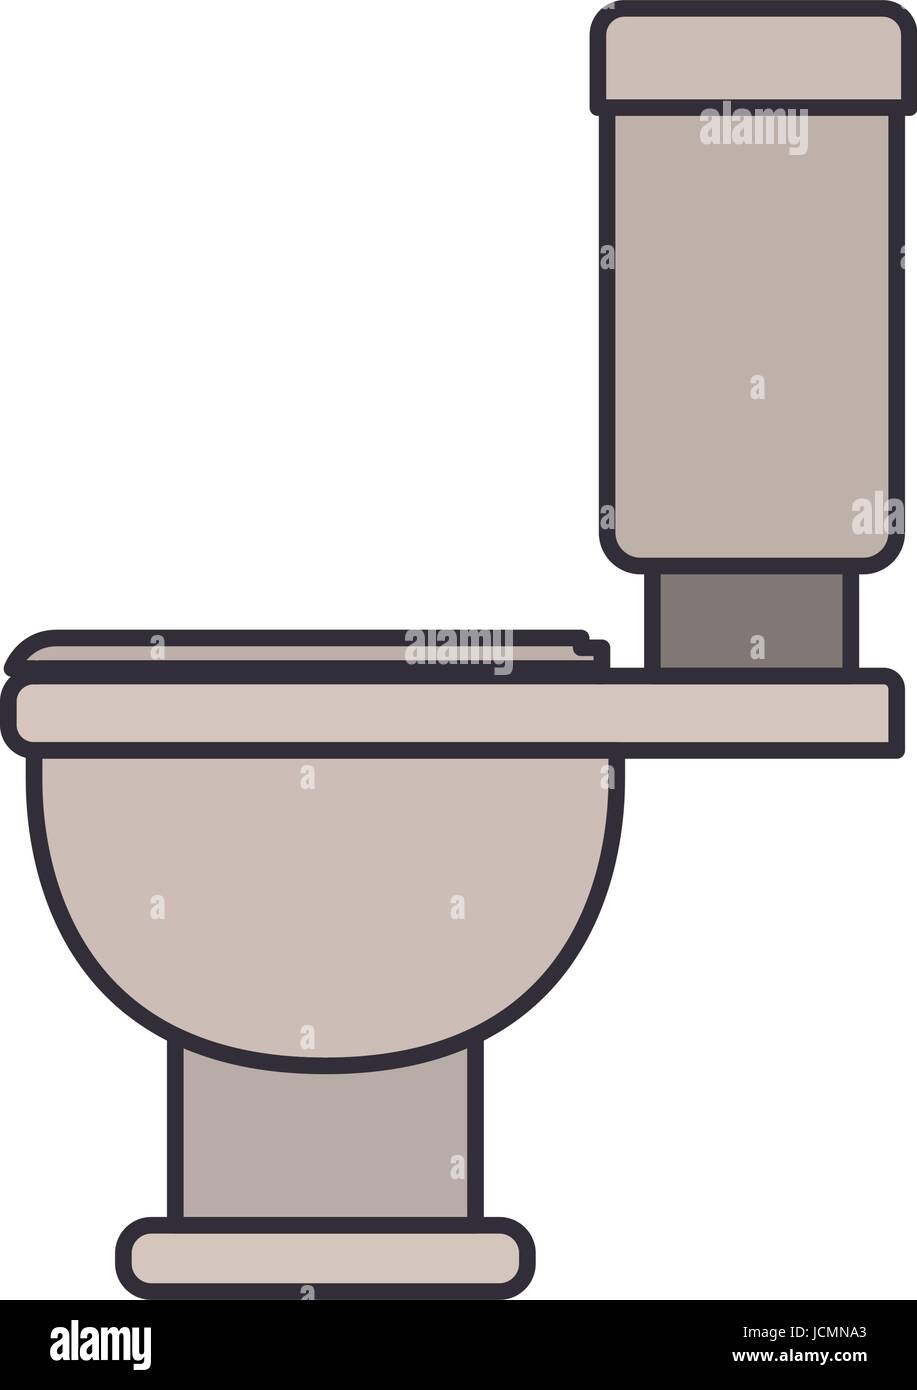 color image of toilet icon side view Stock Vector